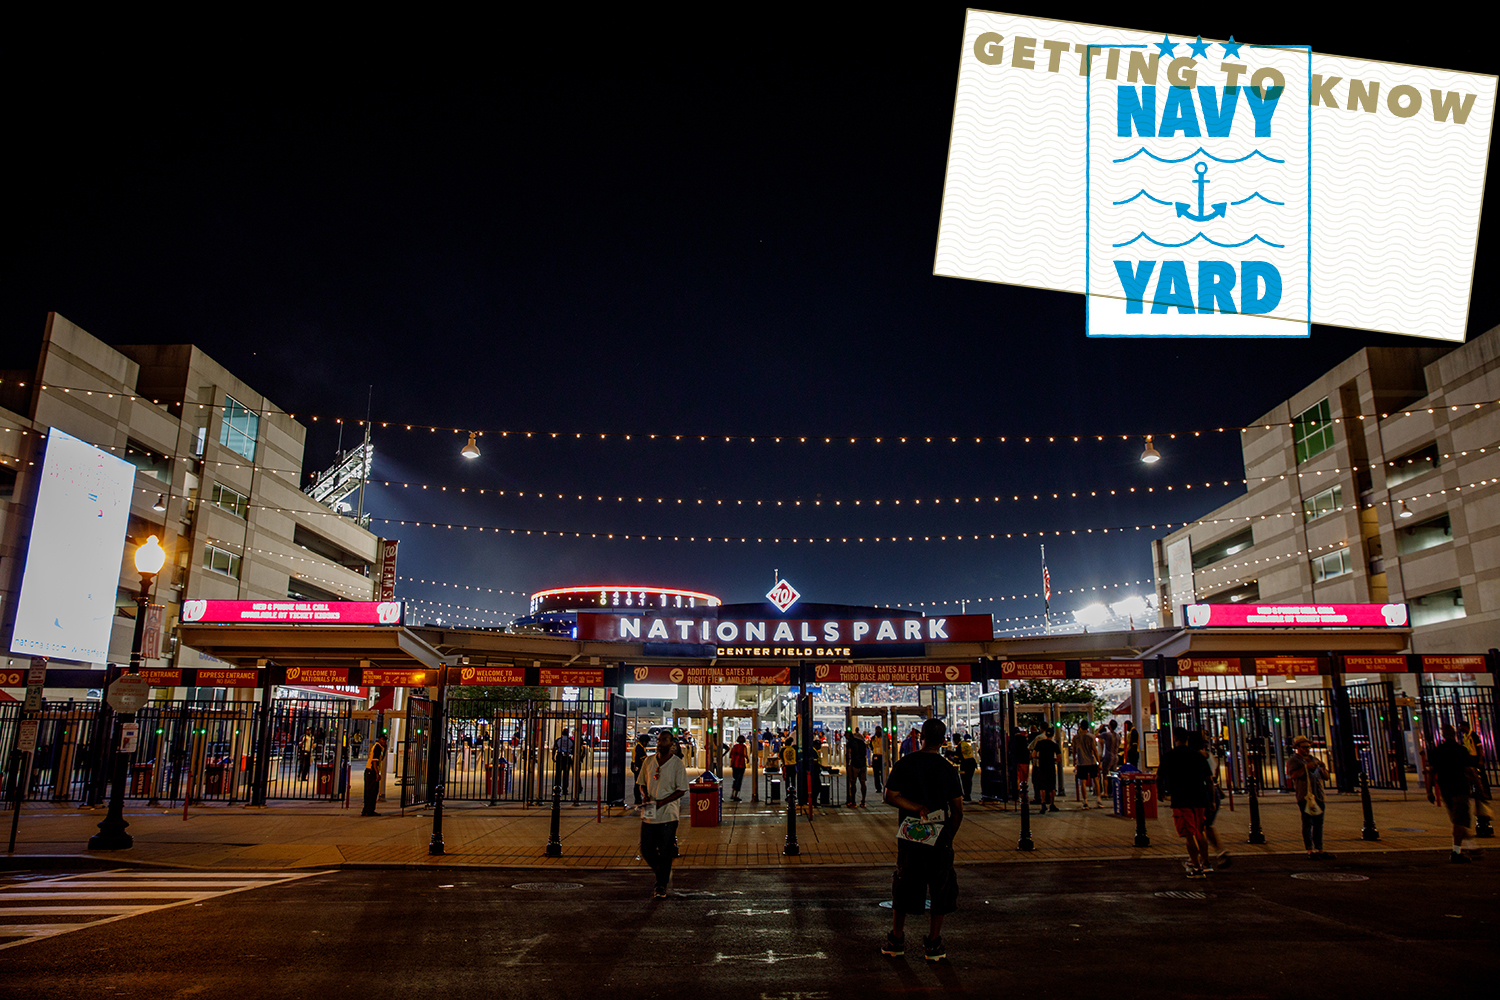 Nationals Park, home of the Washington Nationals, is one of Navy Yard's centerpiece attractions. (William Atkins/GW Today)